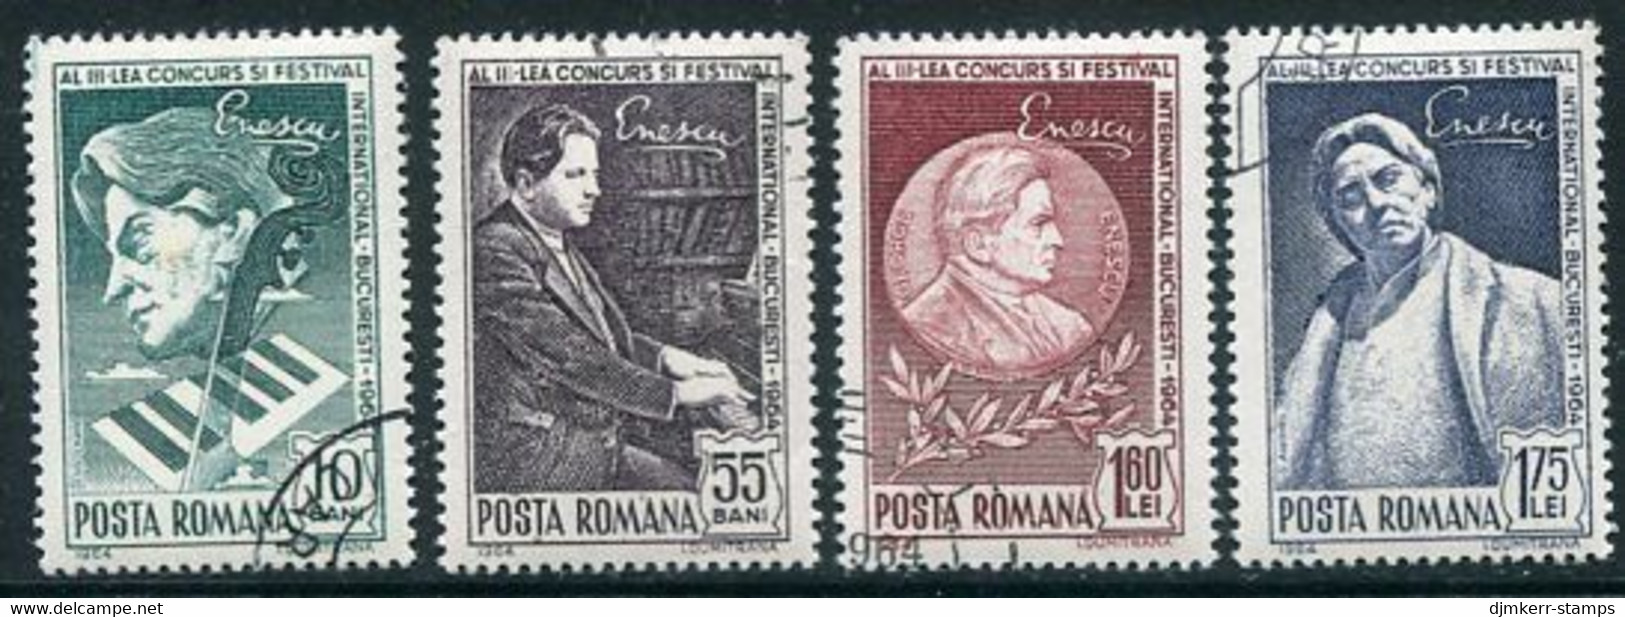 ROMANIA 1964 Enescu Music Competition Used.  Michel 2326-29 - Used Stamps